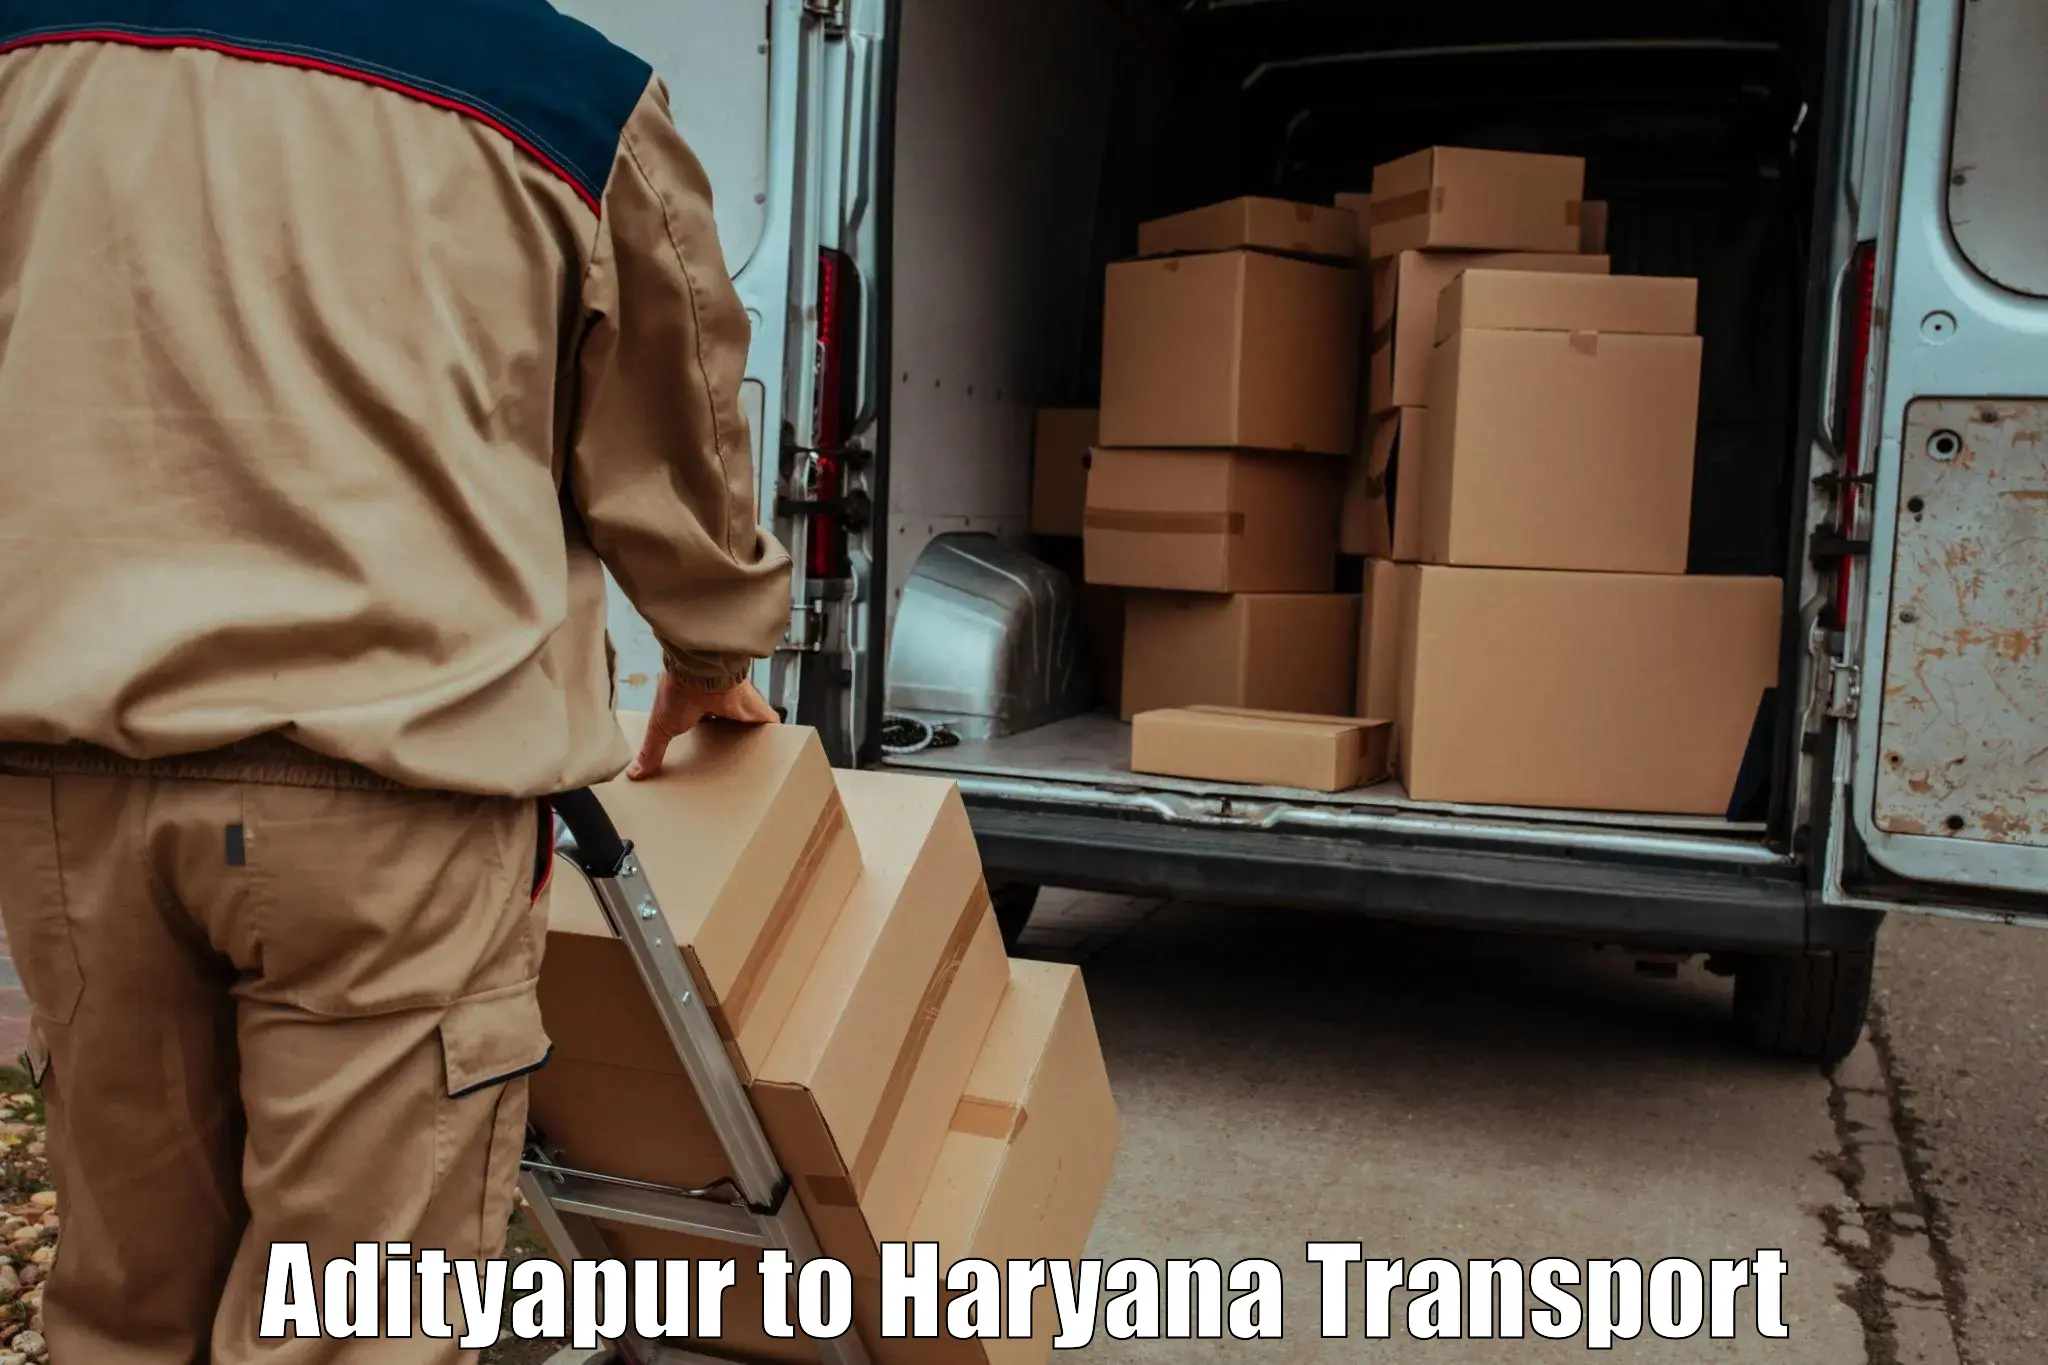 Delivery service Adityapur to Sonipat